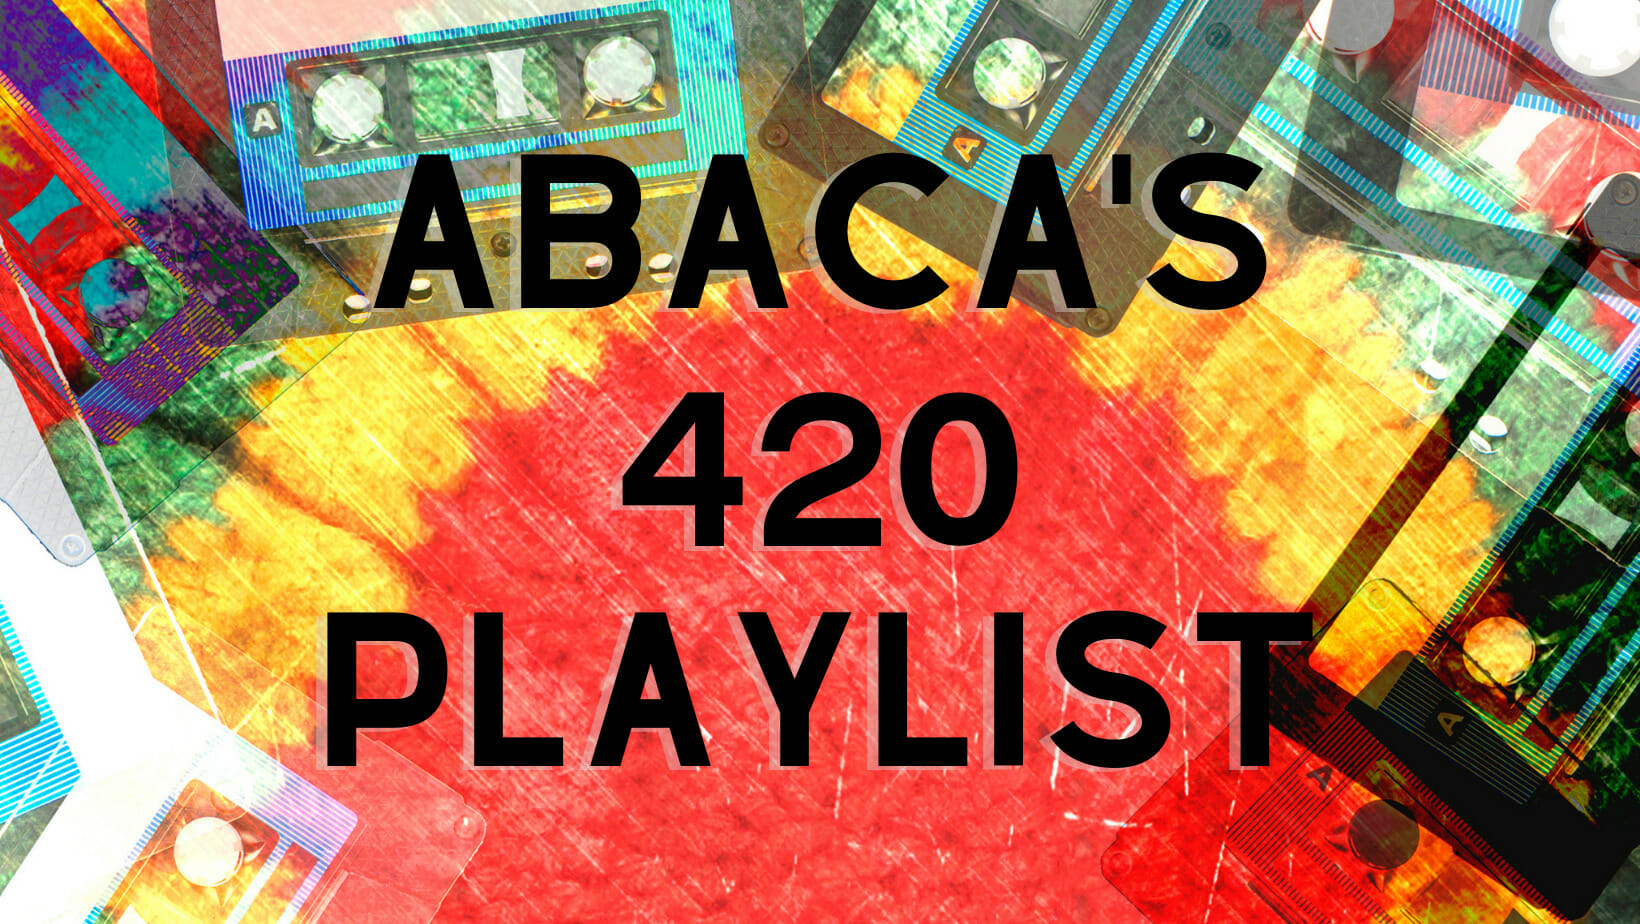 The words Abaca's 420 playlist overlaying a red, yellow and green tie dye background with cassette tapes around the edges of the image